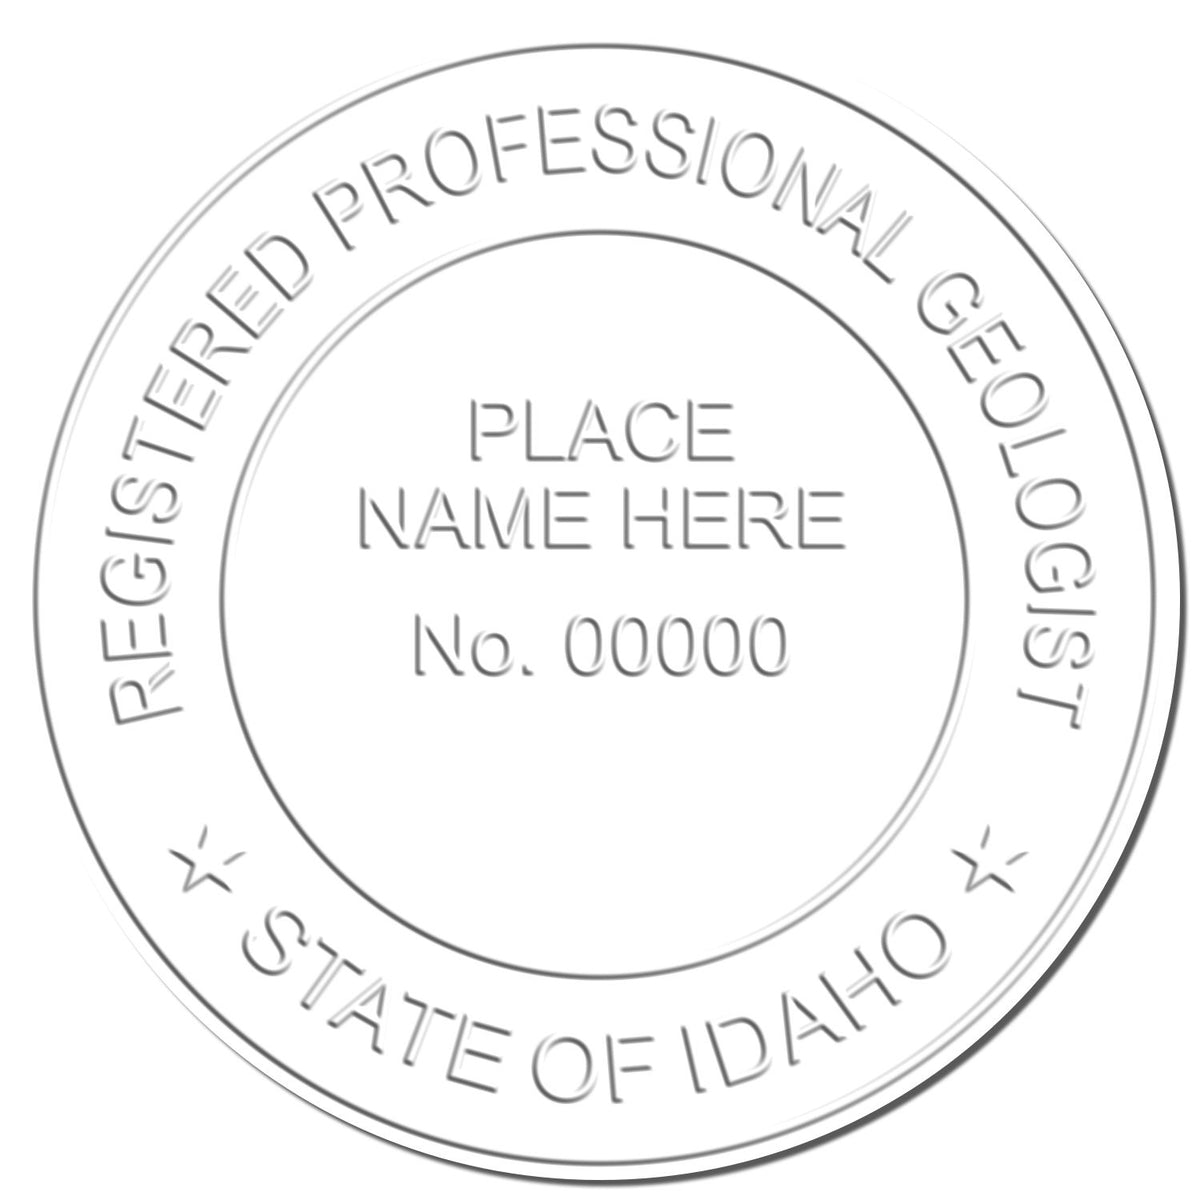 A photograph of the State of Idaho Extended Long Reach Geologist Seal stamp impression reveals a vivid, professional image of the on paper.